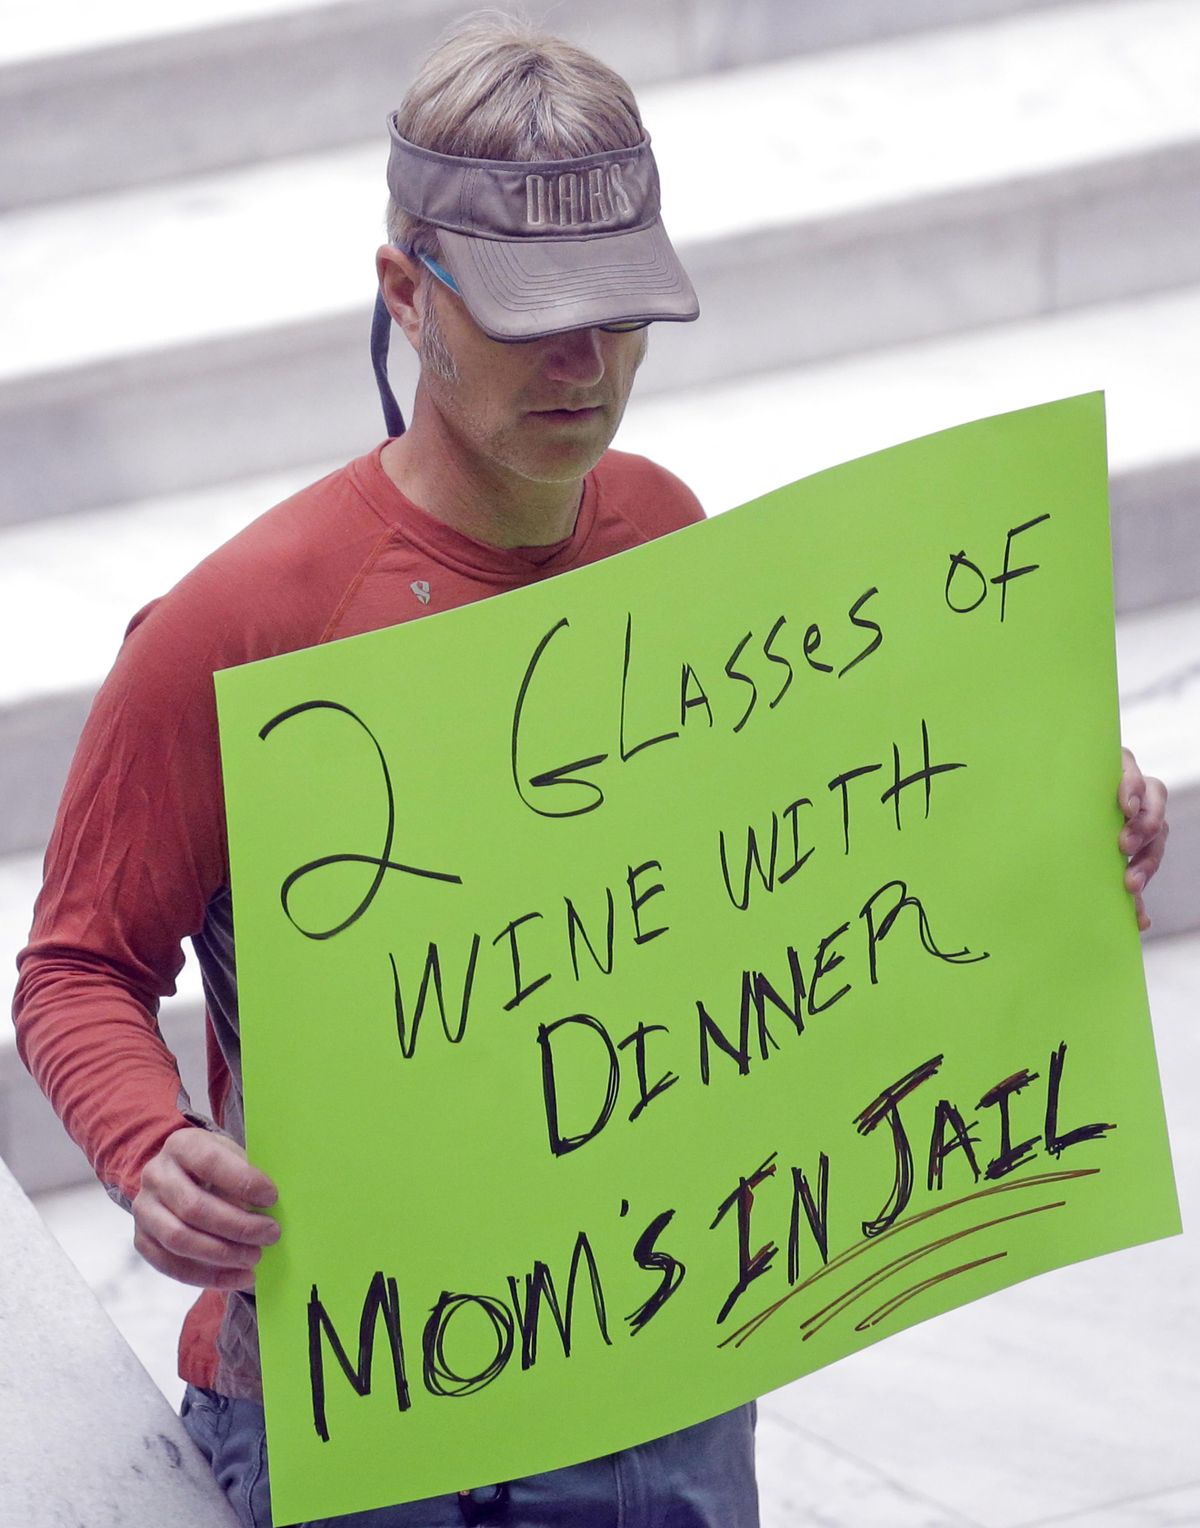 A protester holds a sign during a rally concerning the DUI threshold March 17, 2017, at the Utah State Capitol in Salt Lake City. New Year’s Eve revelers in Utah may find themselves with more than a hangover as 2019 dawns: If they drink and drive, they could get hit by the newest and lowest DUI threshold in the nation. The .05 percent limit goes into effect Dec. 30, despite protests that it will punish responsible drinkers, hurt the state’s tourism industry and amplify its alcohol-unfriendly reputation. (Rick Bowmer / AP)